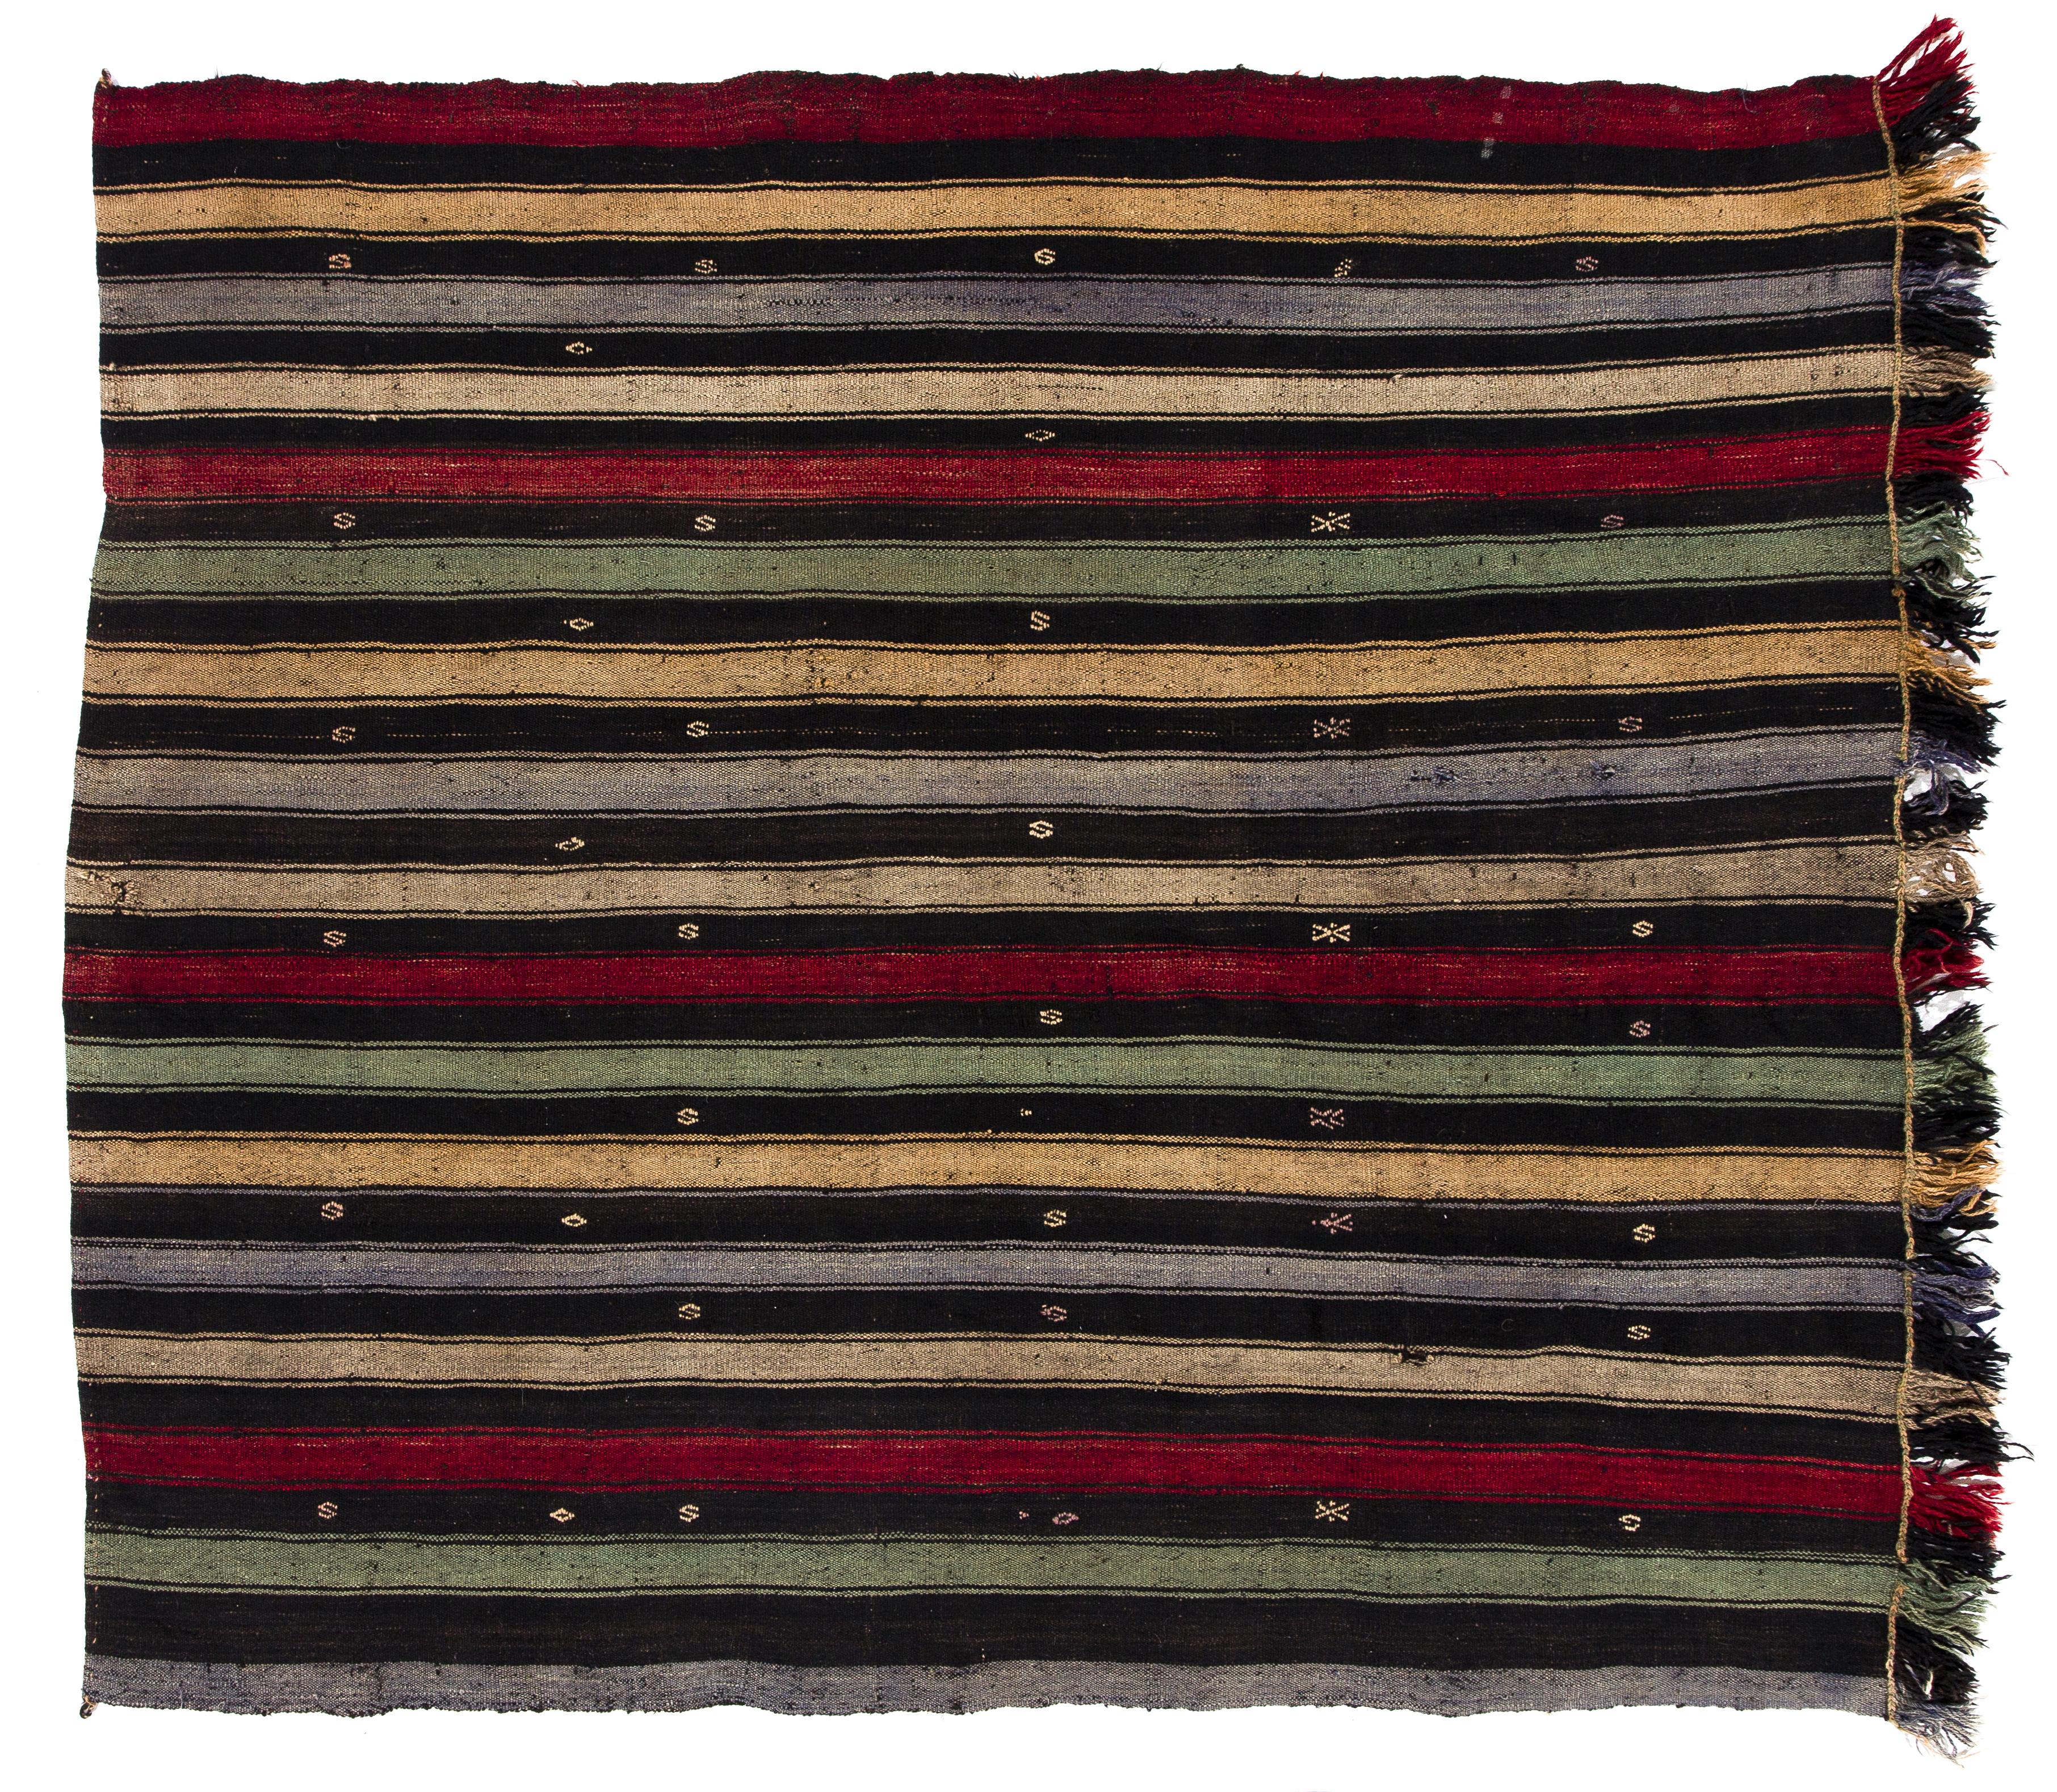 20th Century 5.3x6 Ft Turkish Kilim 'Flat-Weave' with Vertical Bands, 100% Wool, Colorful Rug For Sale